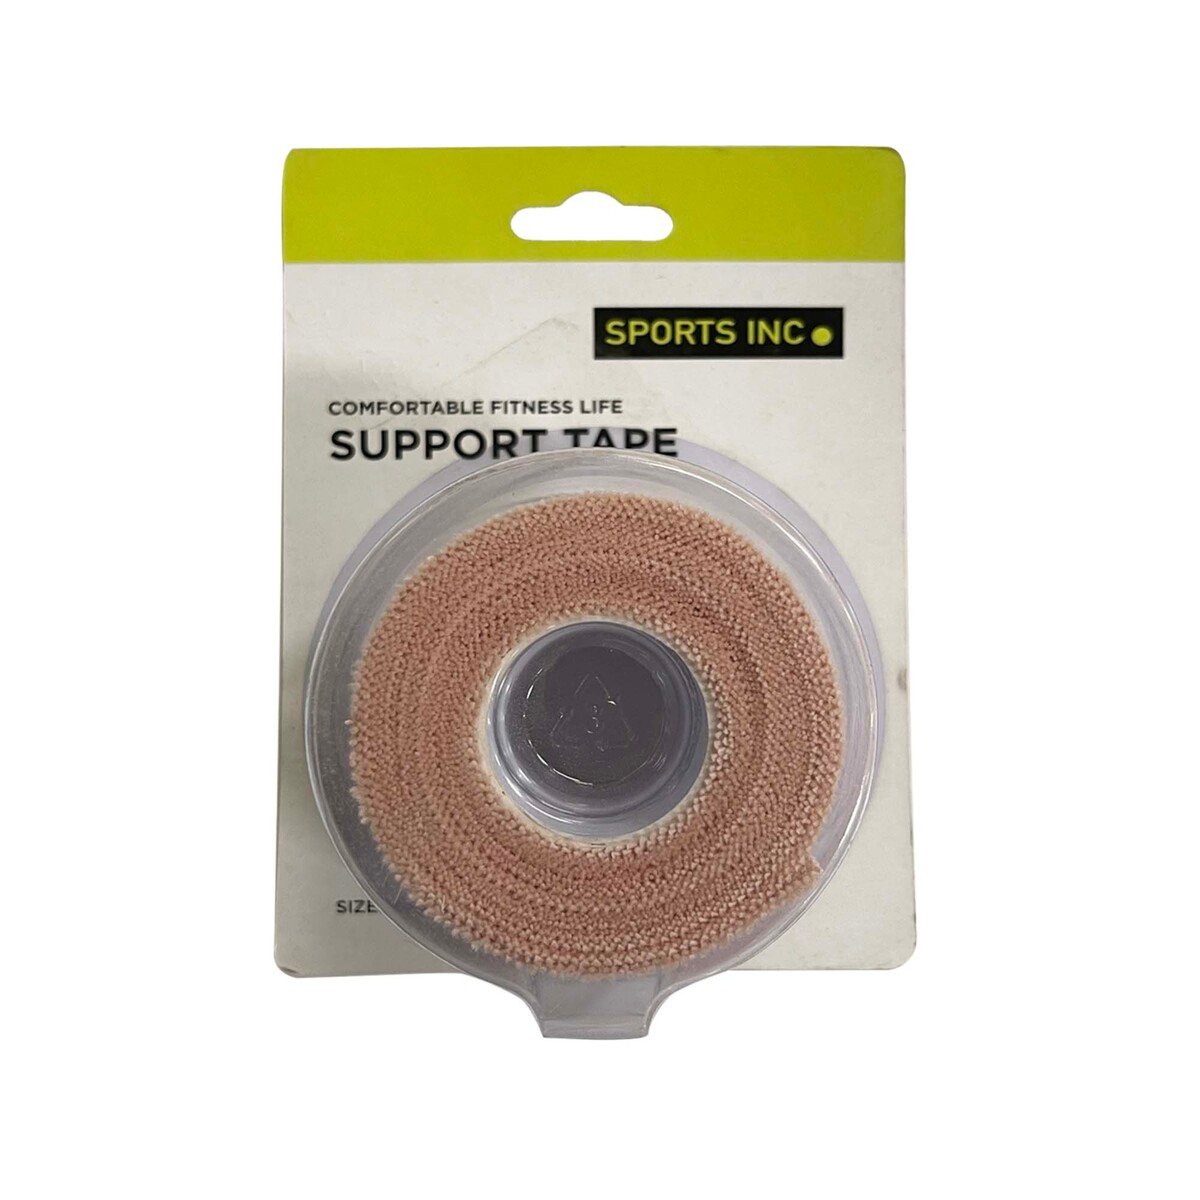 Sports INC Support Tape IRBD004, Size: 5cmx4.5m